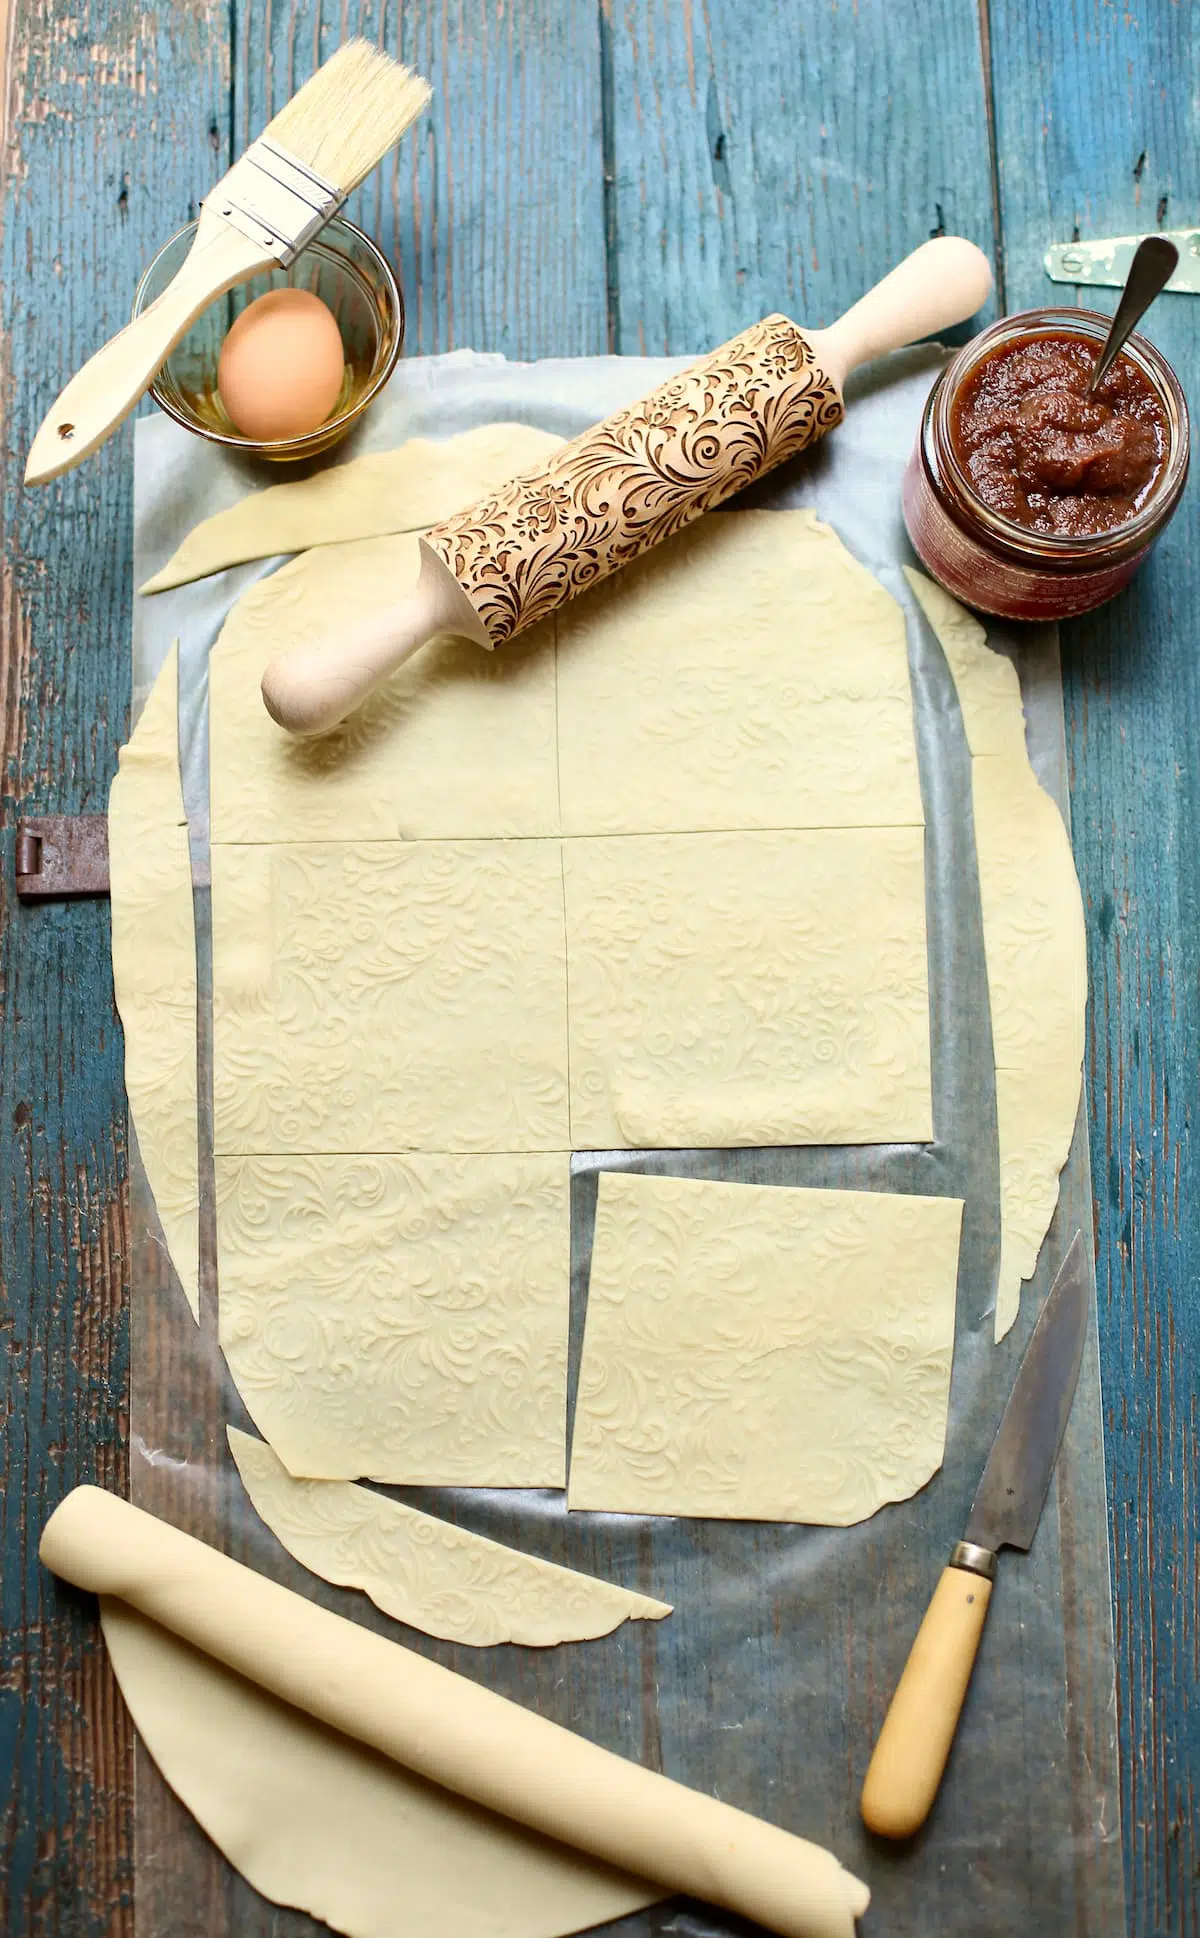 a sheet of pastry dough on a blue wooden board with a rolling pin, an egg, knife and jar of apple butter.